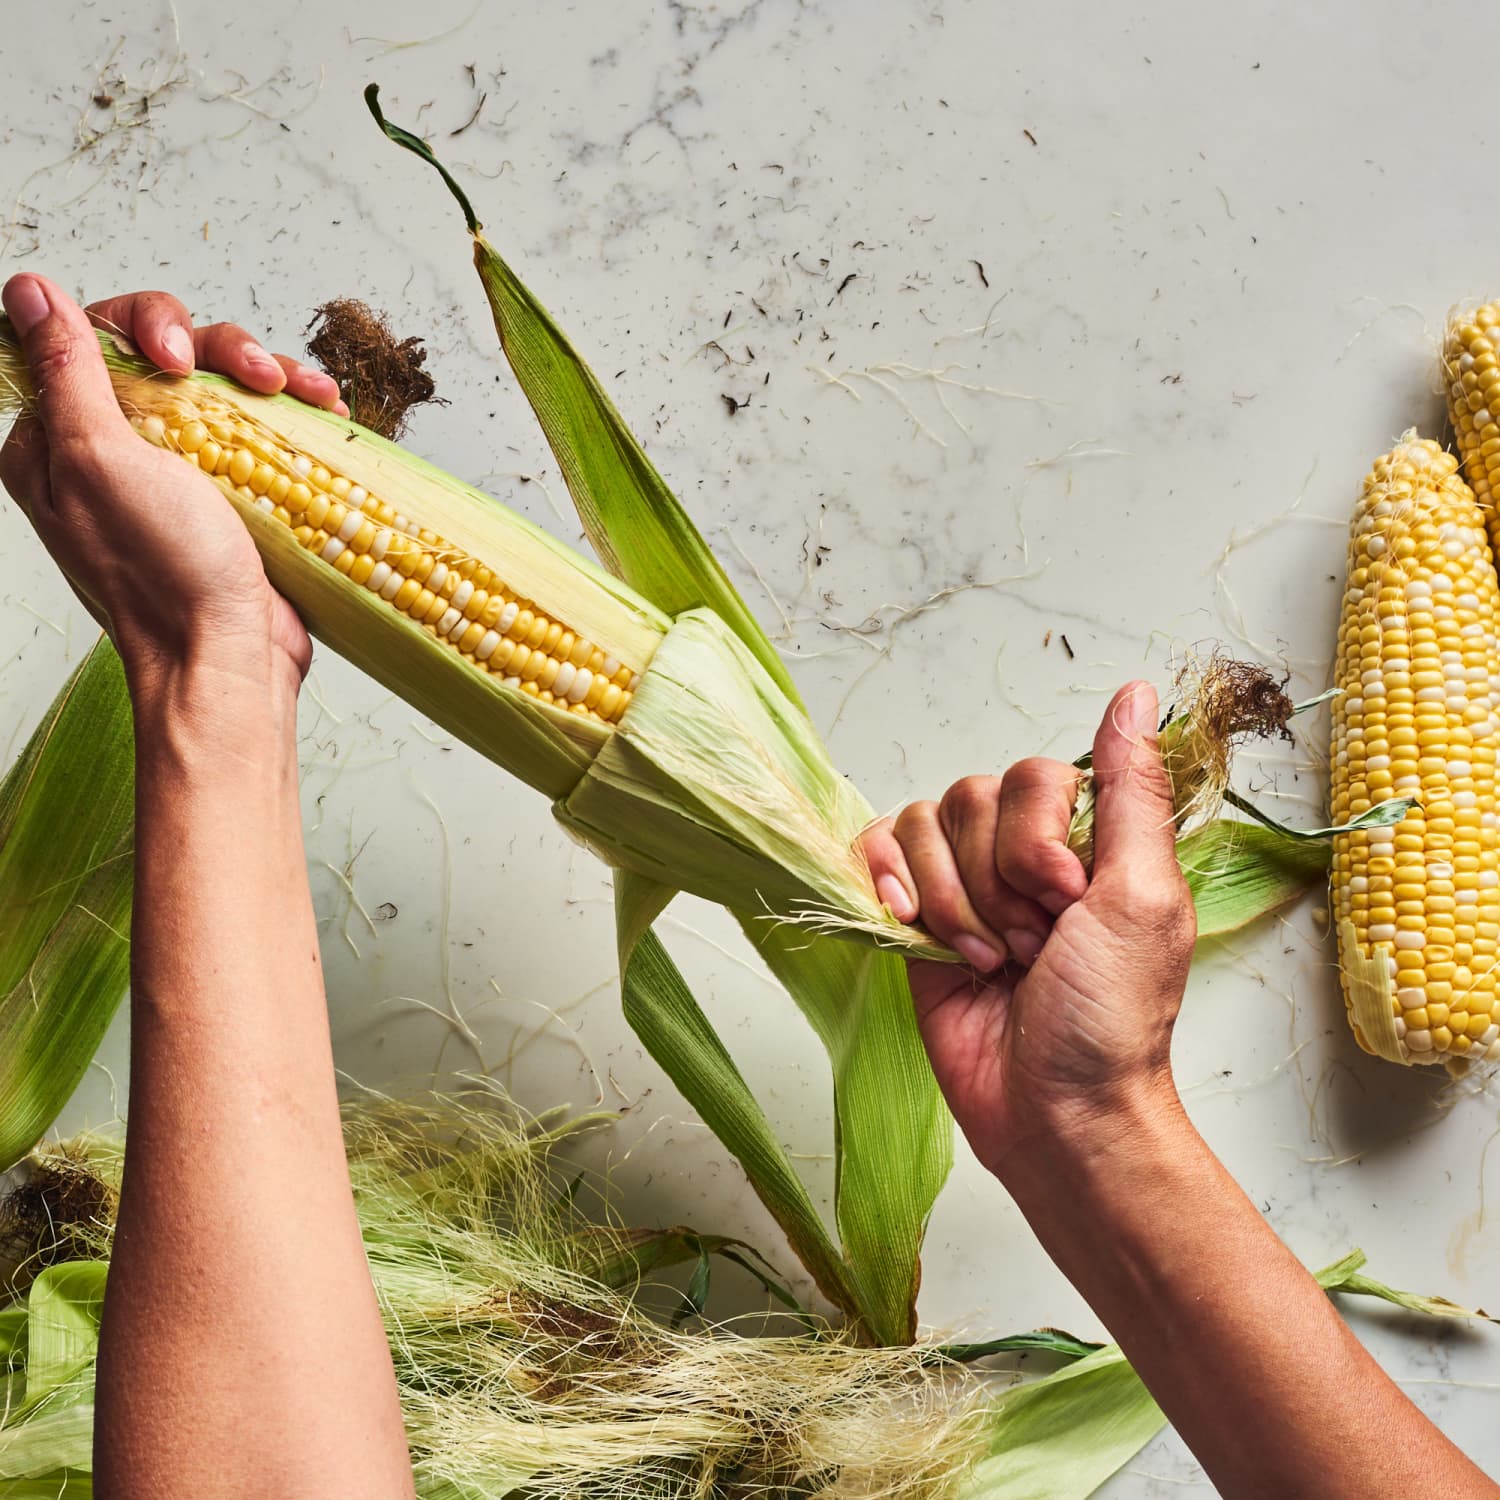 This Handy Gadget from OXO Will Make Prepping Summer Corn a Breeze